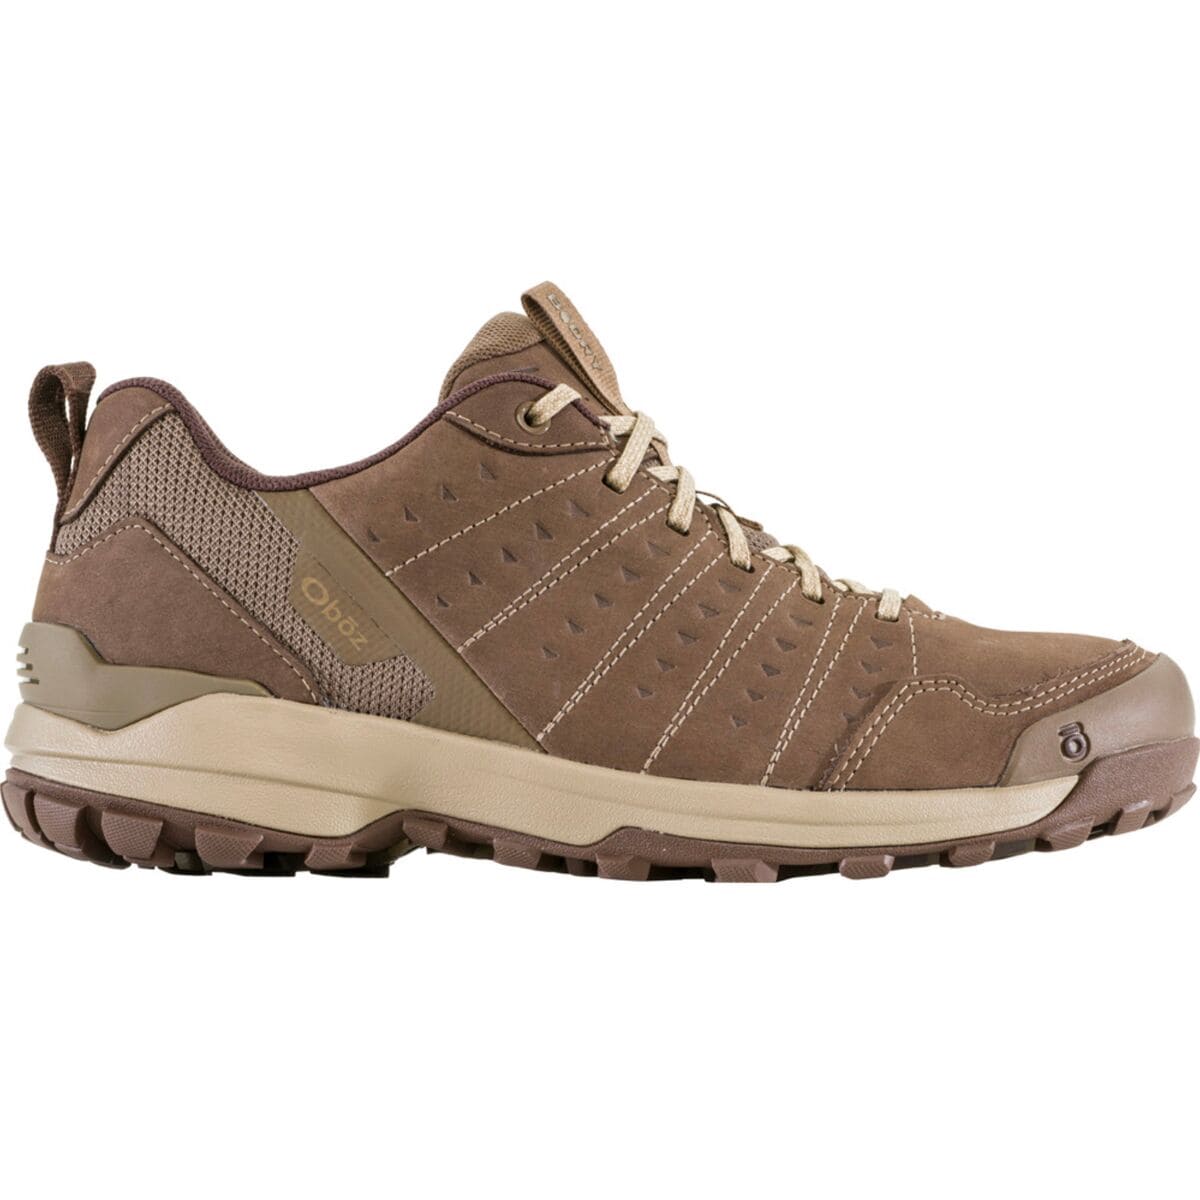 Sypes Low Leather B-DRY Hiking Shoe - Men